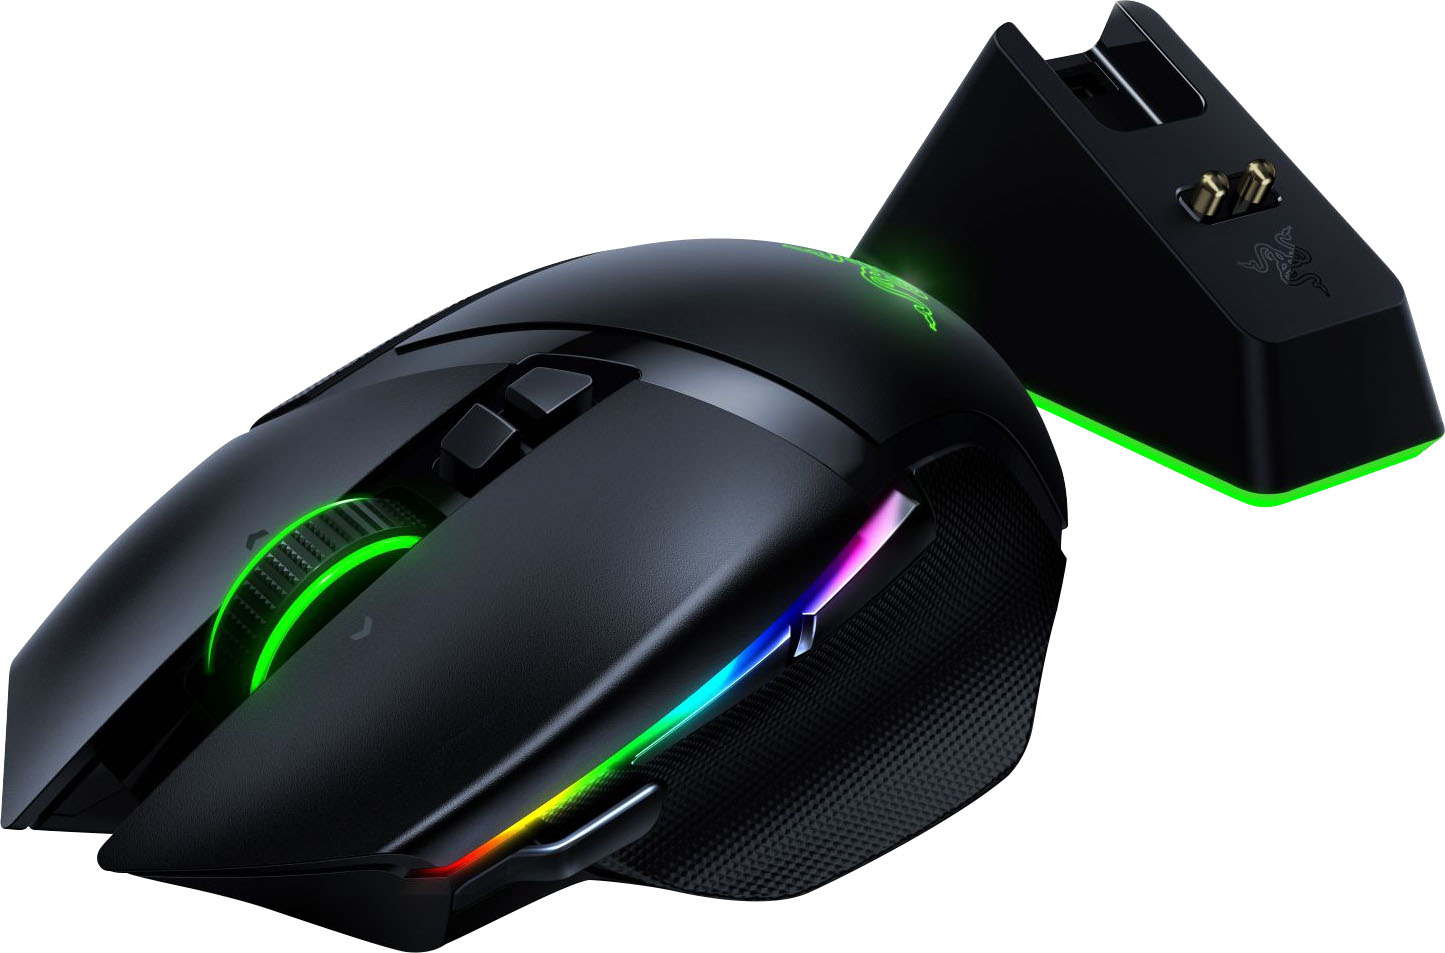 Razer Basilisk Ultimate Wireless Optical  with HyperSpeed Technology and Charging Dock Gaming Mouse Black RZ01-03170100-R3U1 - Best Buy $69.99